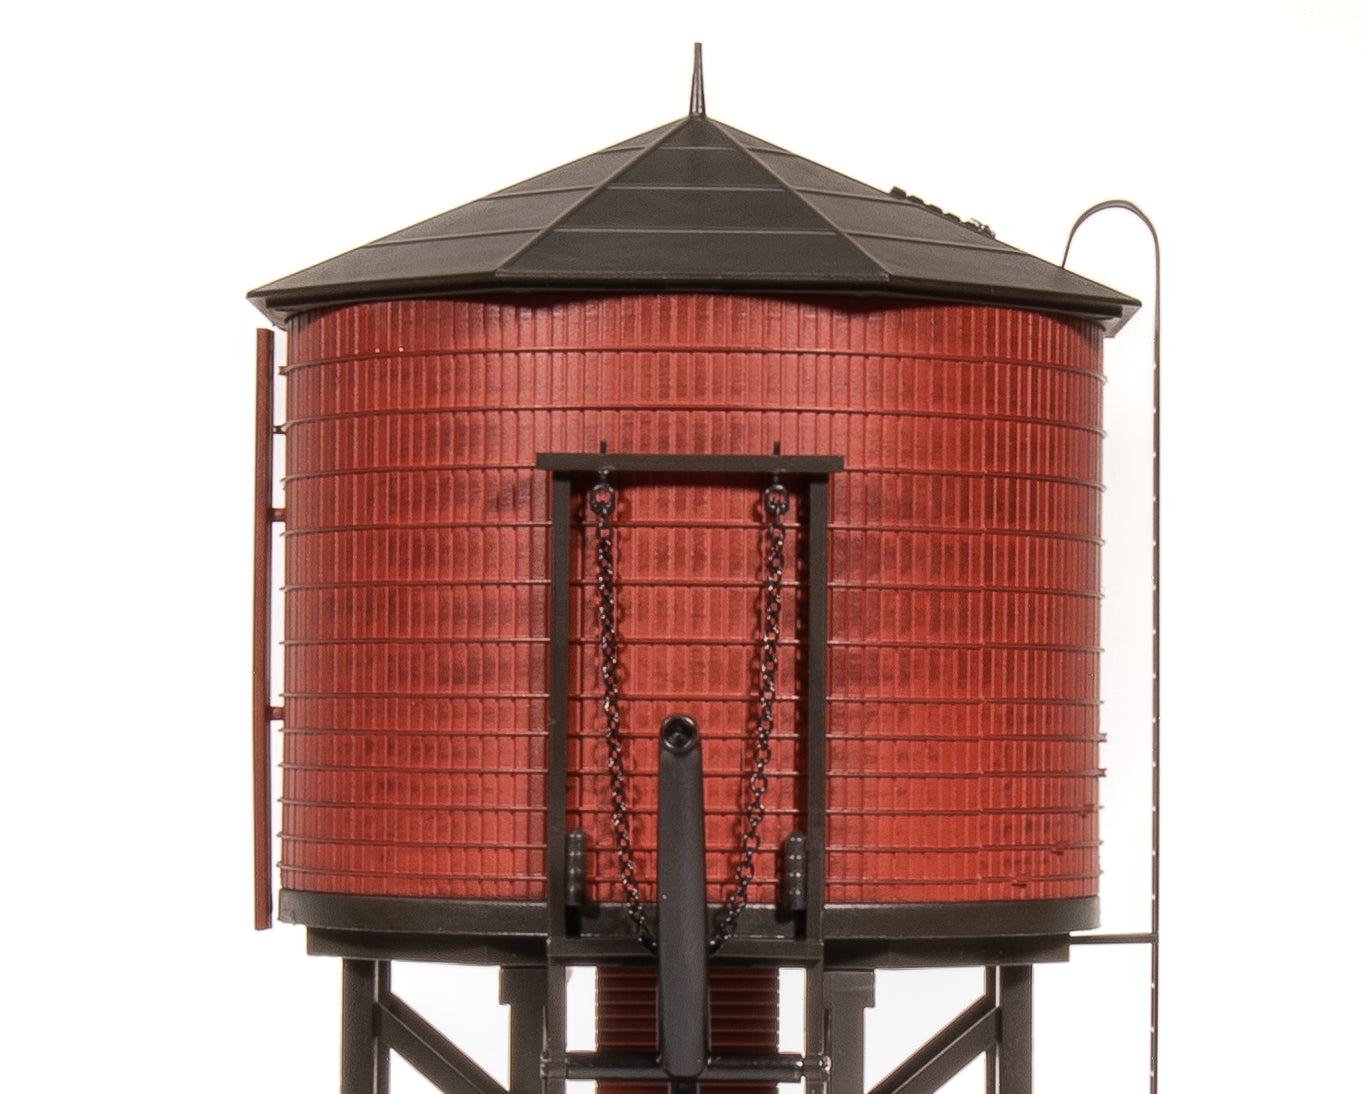 7916 Operating Water Tower w/ Sound, CB&Q, Weathered, HO Default Title